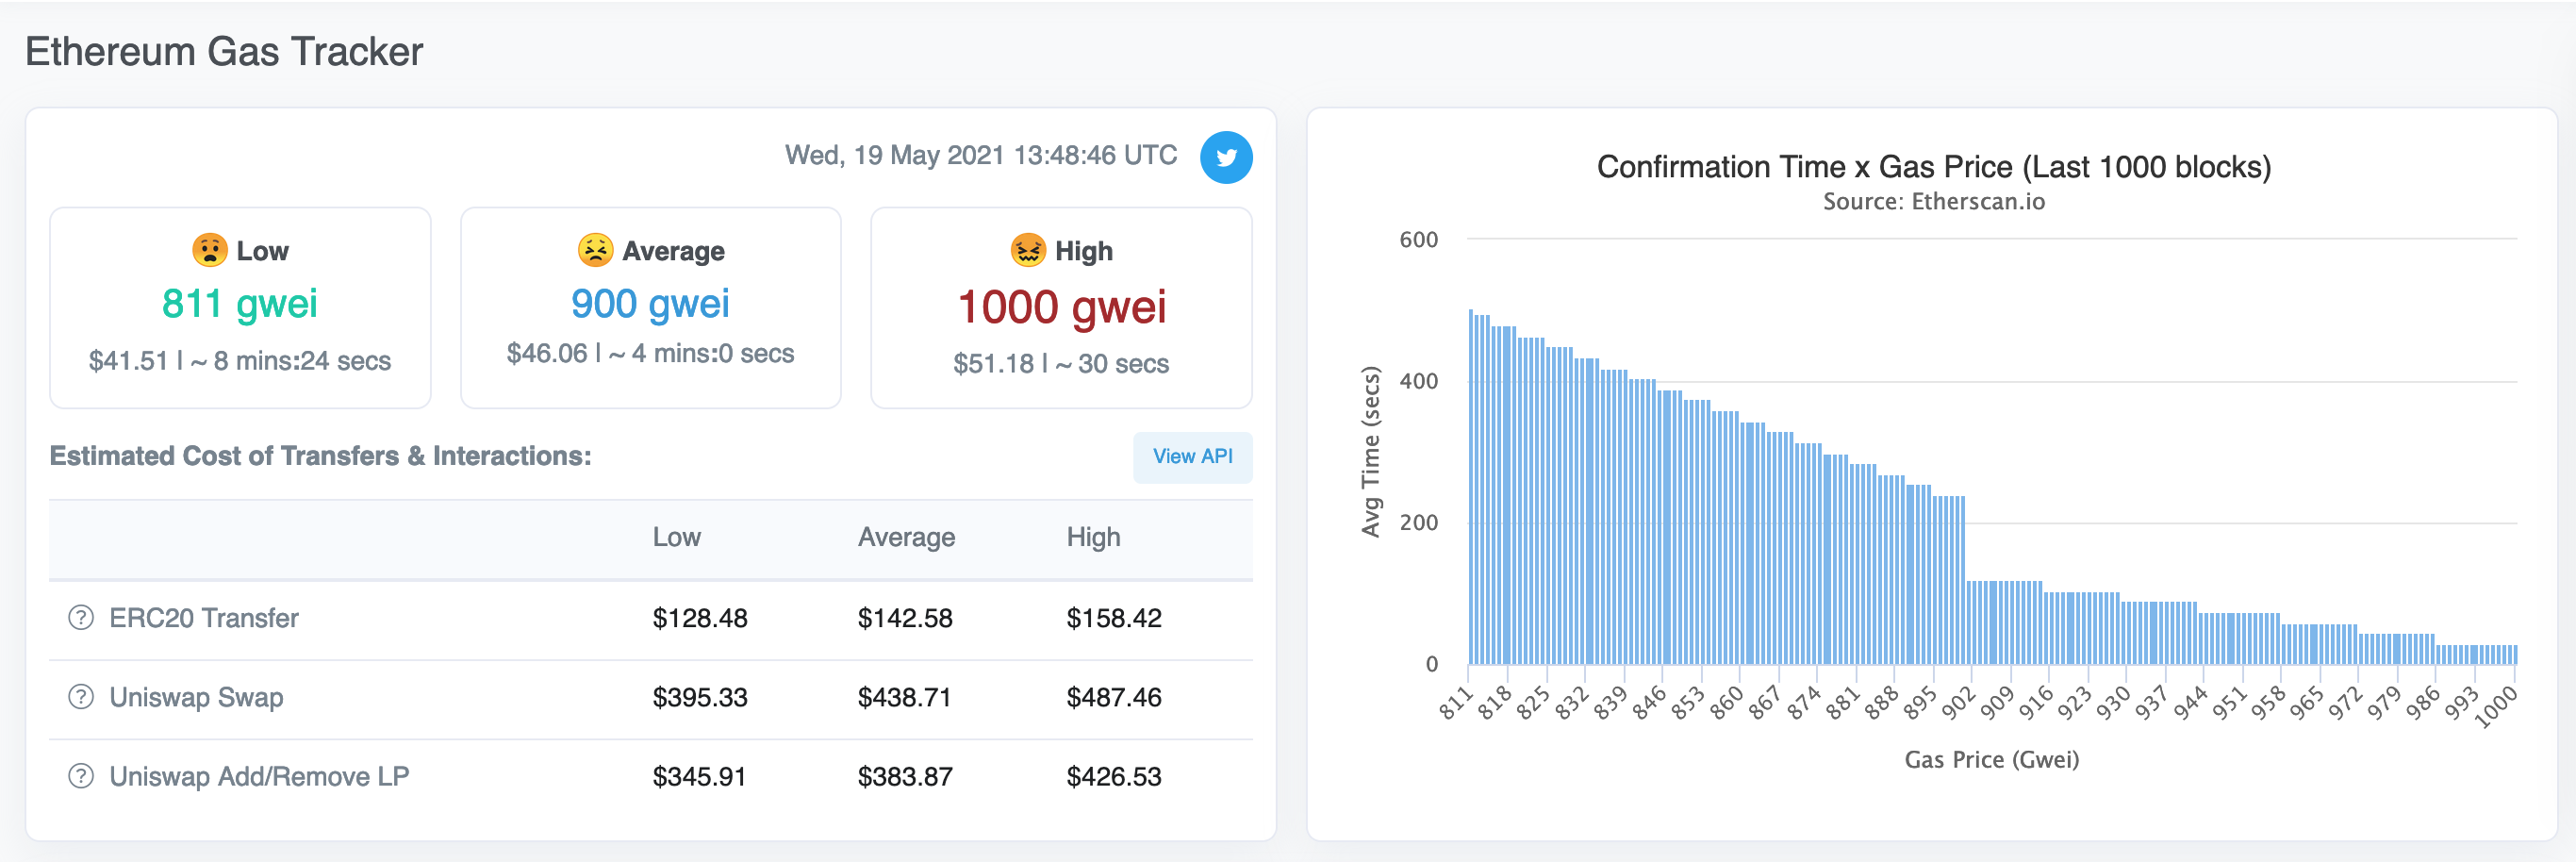 Ethereum gas fees of 1000 gwei per gas from May 21, 2021